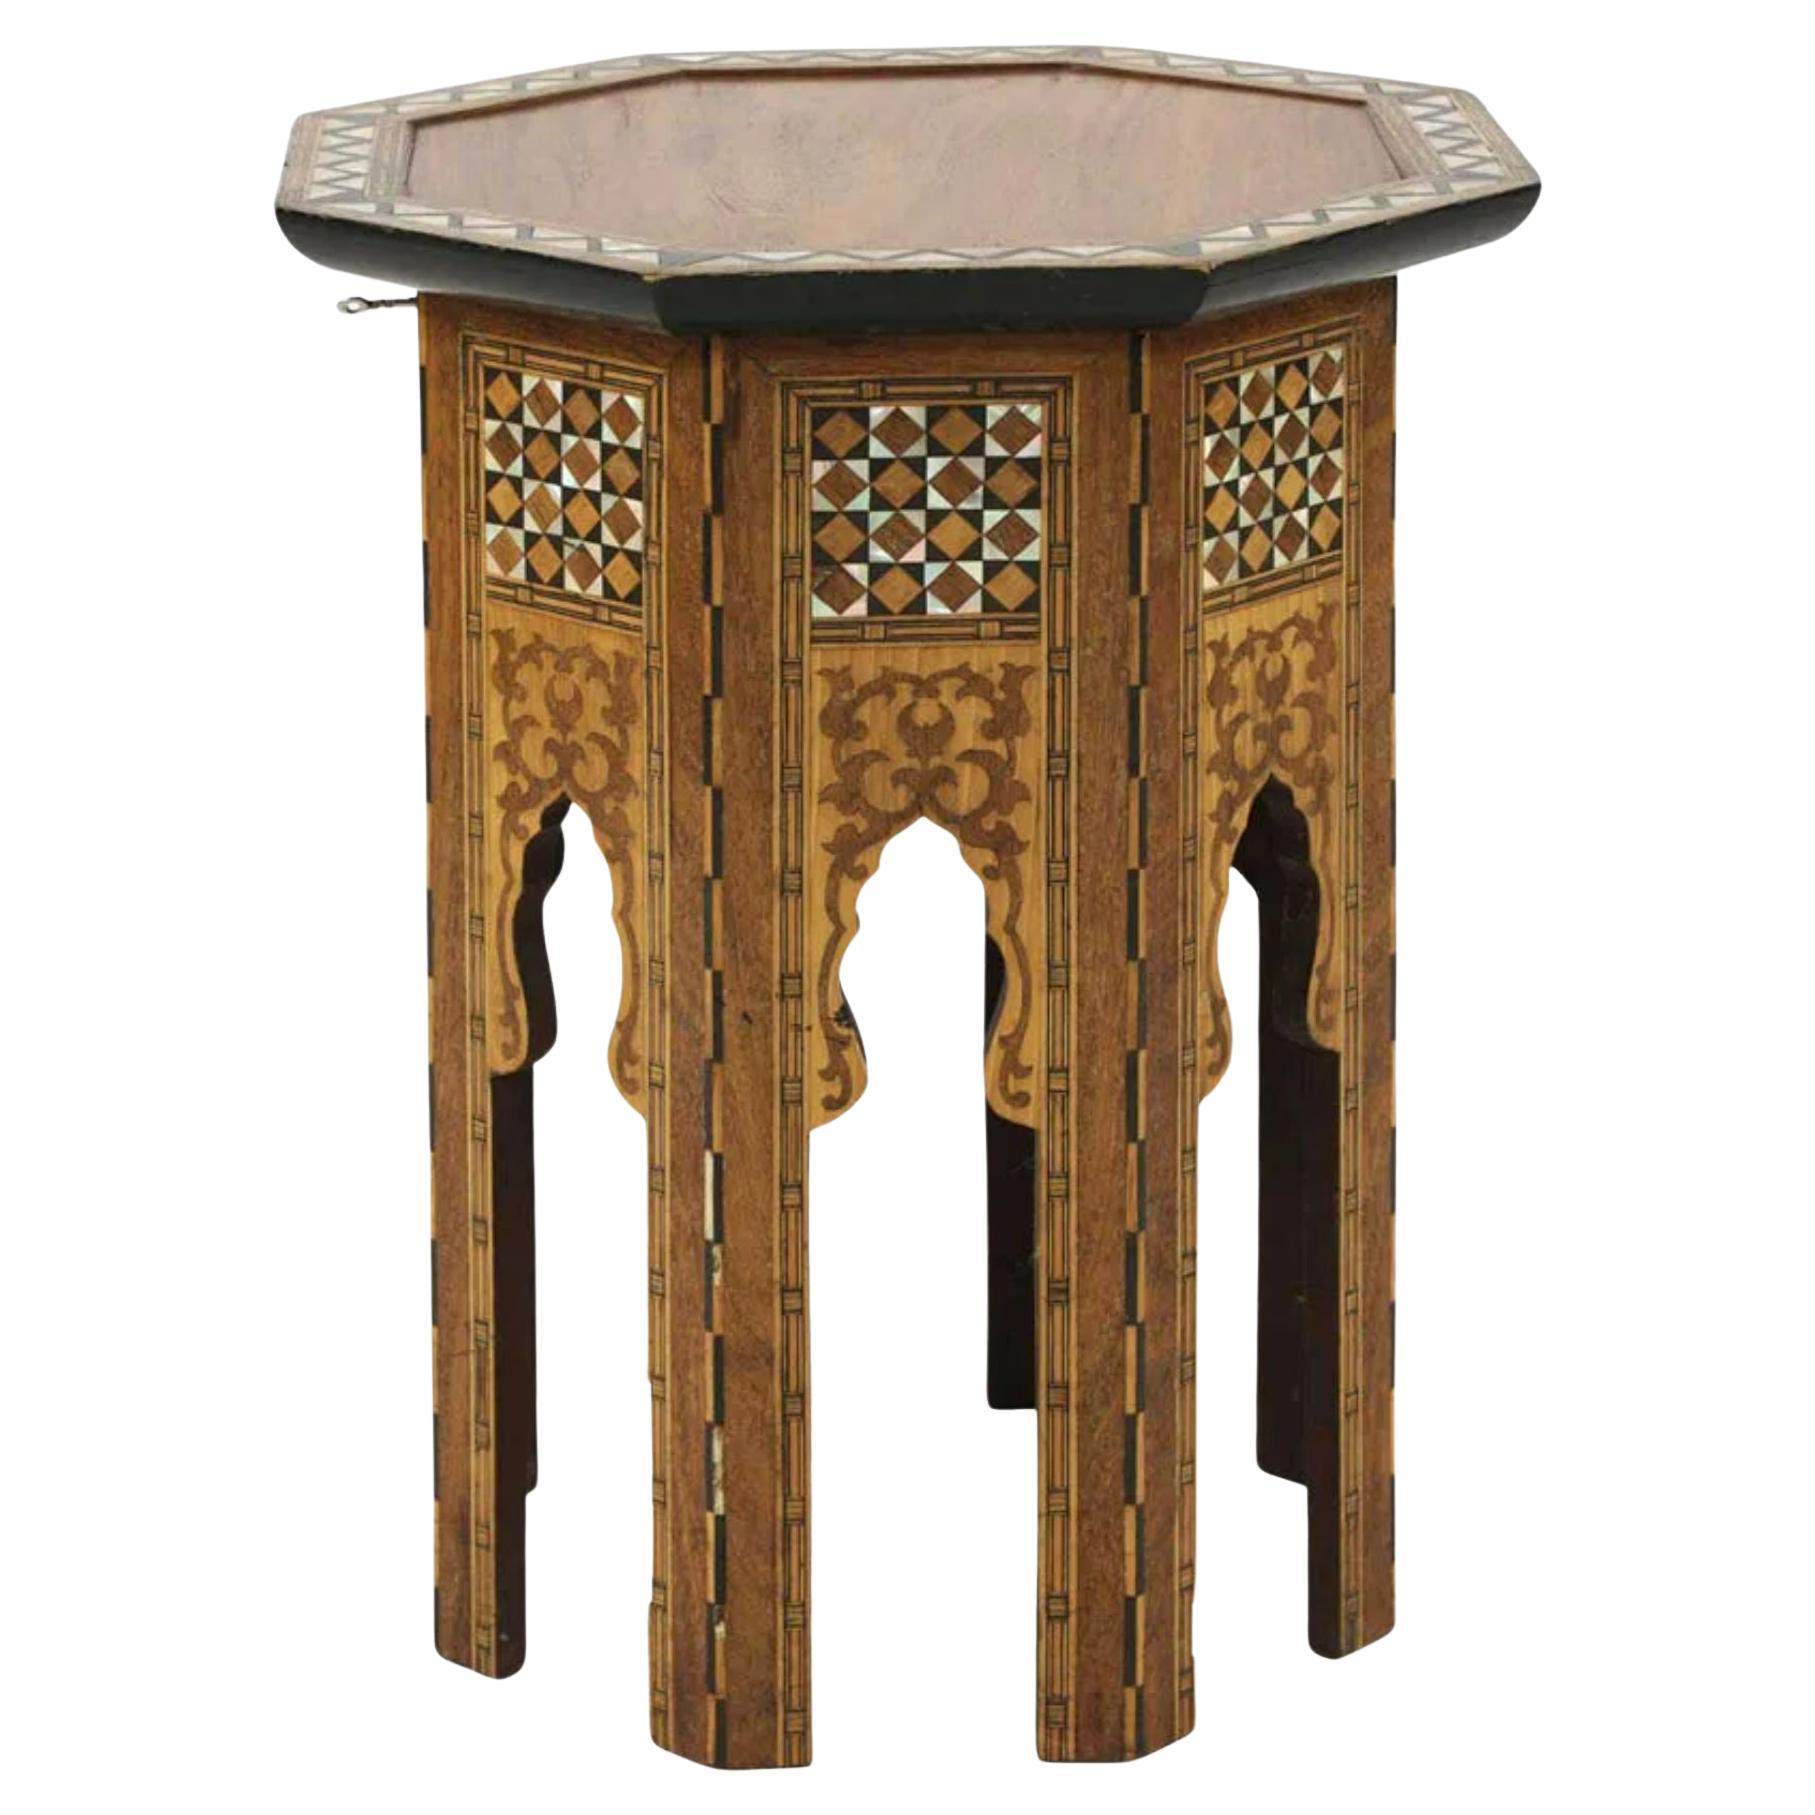 Table octogonale syrienne, 19e siècle